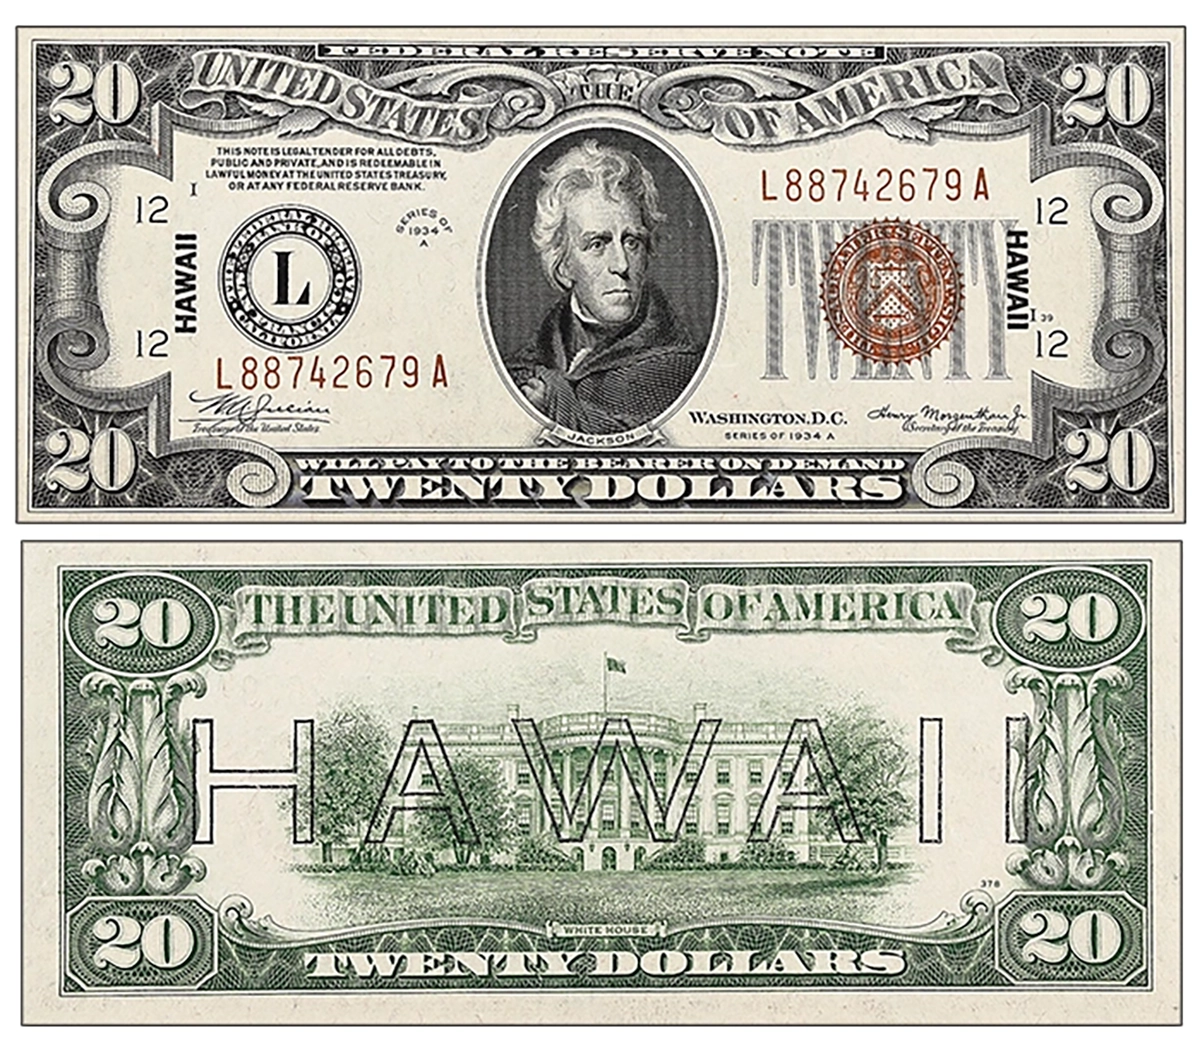 Series 1935A, Hawaii Issue, $20 Federal Reserve Note. Image: Stack's Bowers.